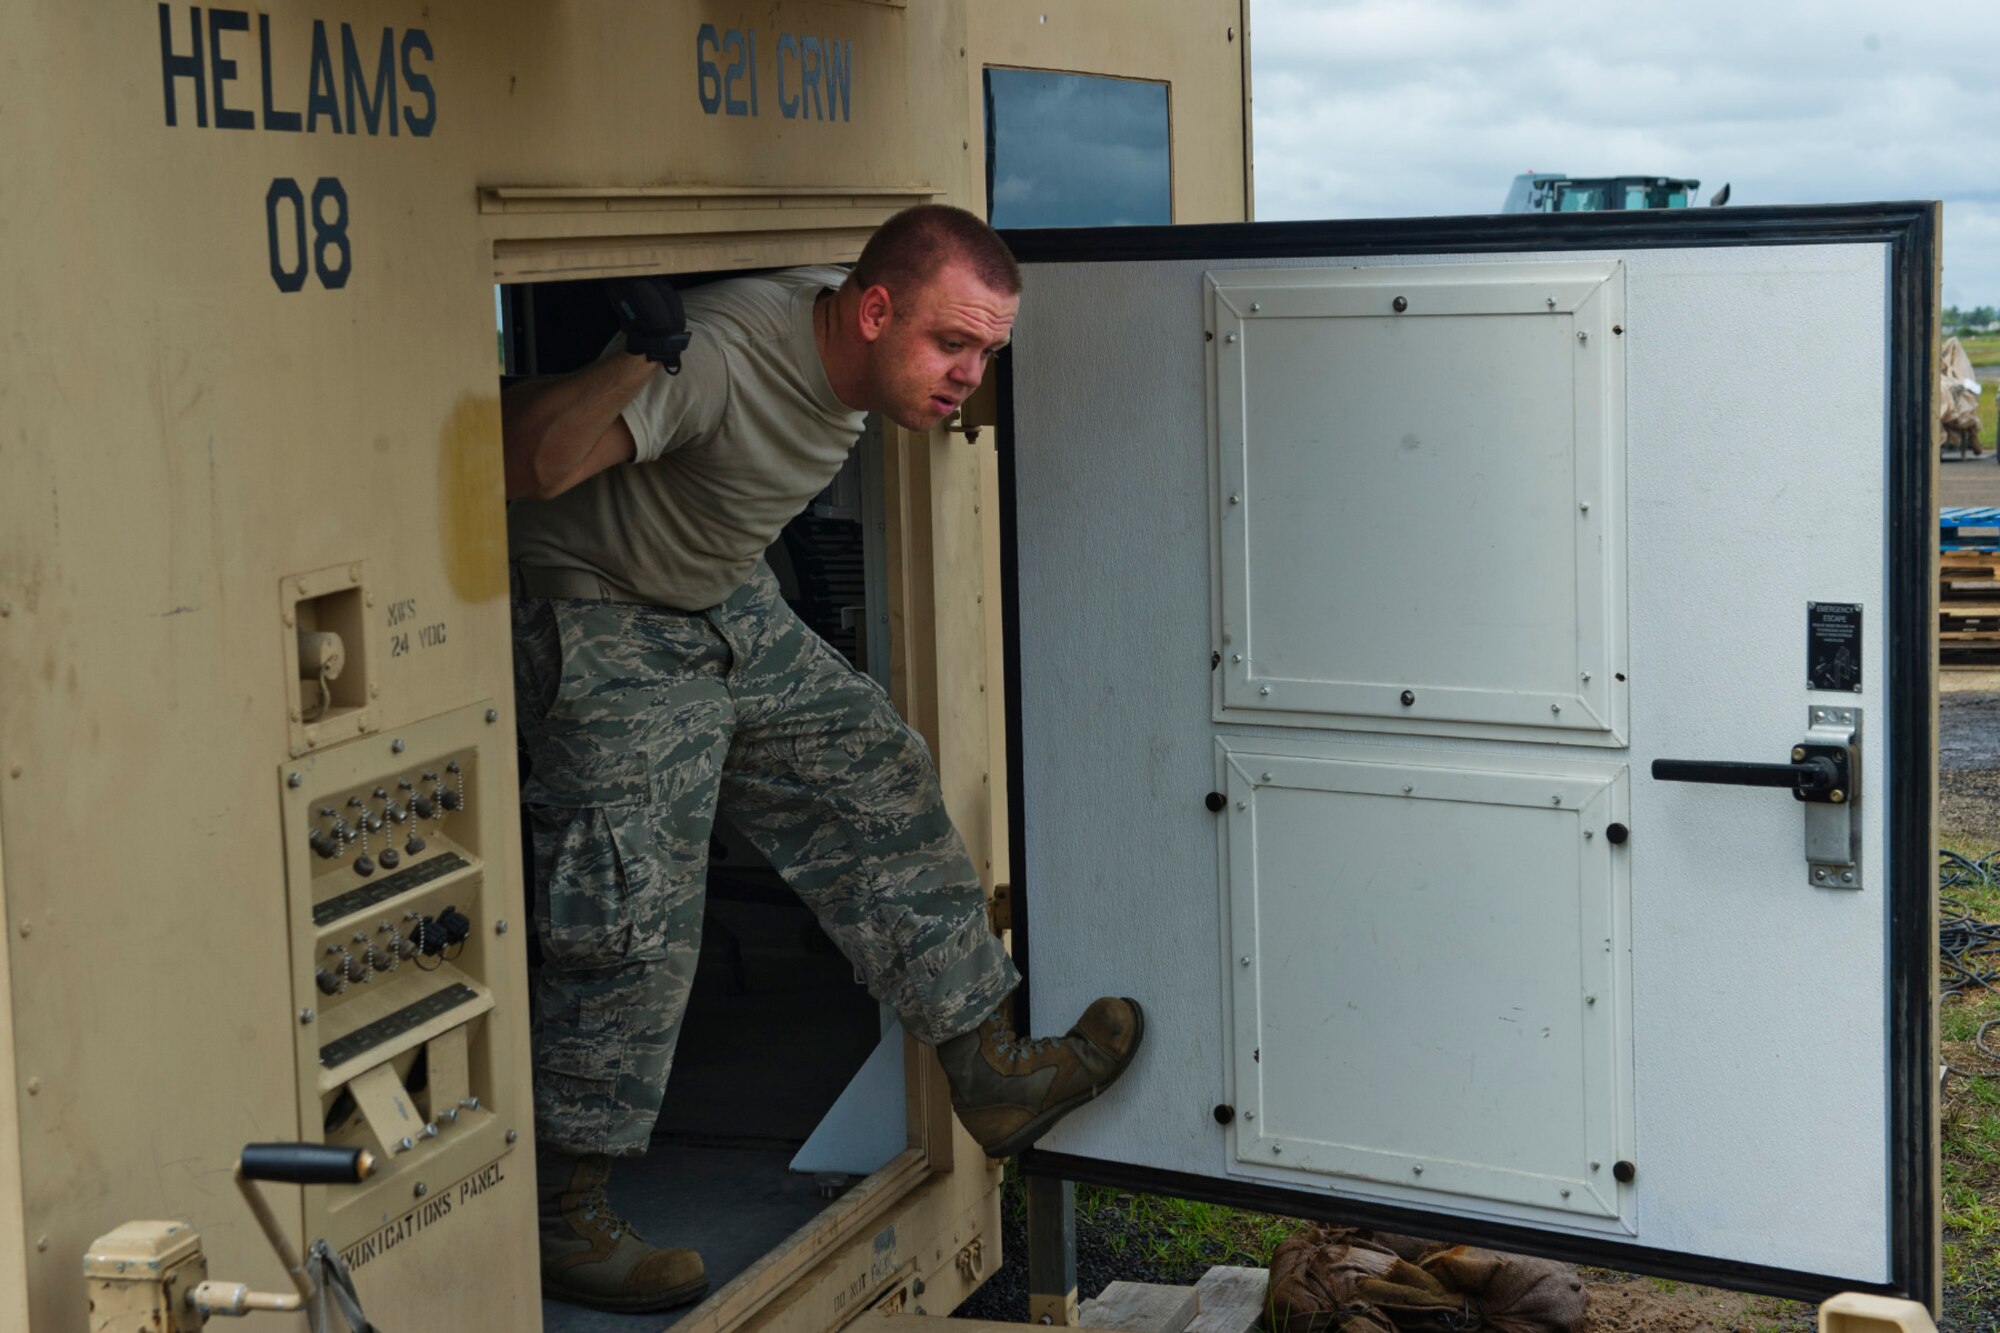 U.S. Air Force Senior Airman Derek Brittain from the Joint Task Force-Port Opening assigned to the 621st Contingency Response Wing stationed at Joint Base McGuire-Dix-Lakehurst, N.J., walks through a compartment of a Hard-sided Expandable Lightweight Air Mobile Shelter as he prepares equipment for re-deployment after completing their mission at Roberts International Airport, Republic of Liberia, during Operation UNITED ASSISTANCE, Nov. 9, 2014. The JTF-PO established a hub for cargo distribution to help alleviate the increased traffic of airflow and cargo during OUA, a Department of Defense operation in Liberia to provide logistics, training and engineering support to U.S. Agency for International Development-led efforts to contain the Ebola virus outbreak in western Africa. (U.S. Air Force photo/Staff Sgt. Gustavo Gonzalez/RELEASED)